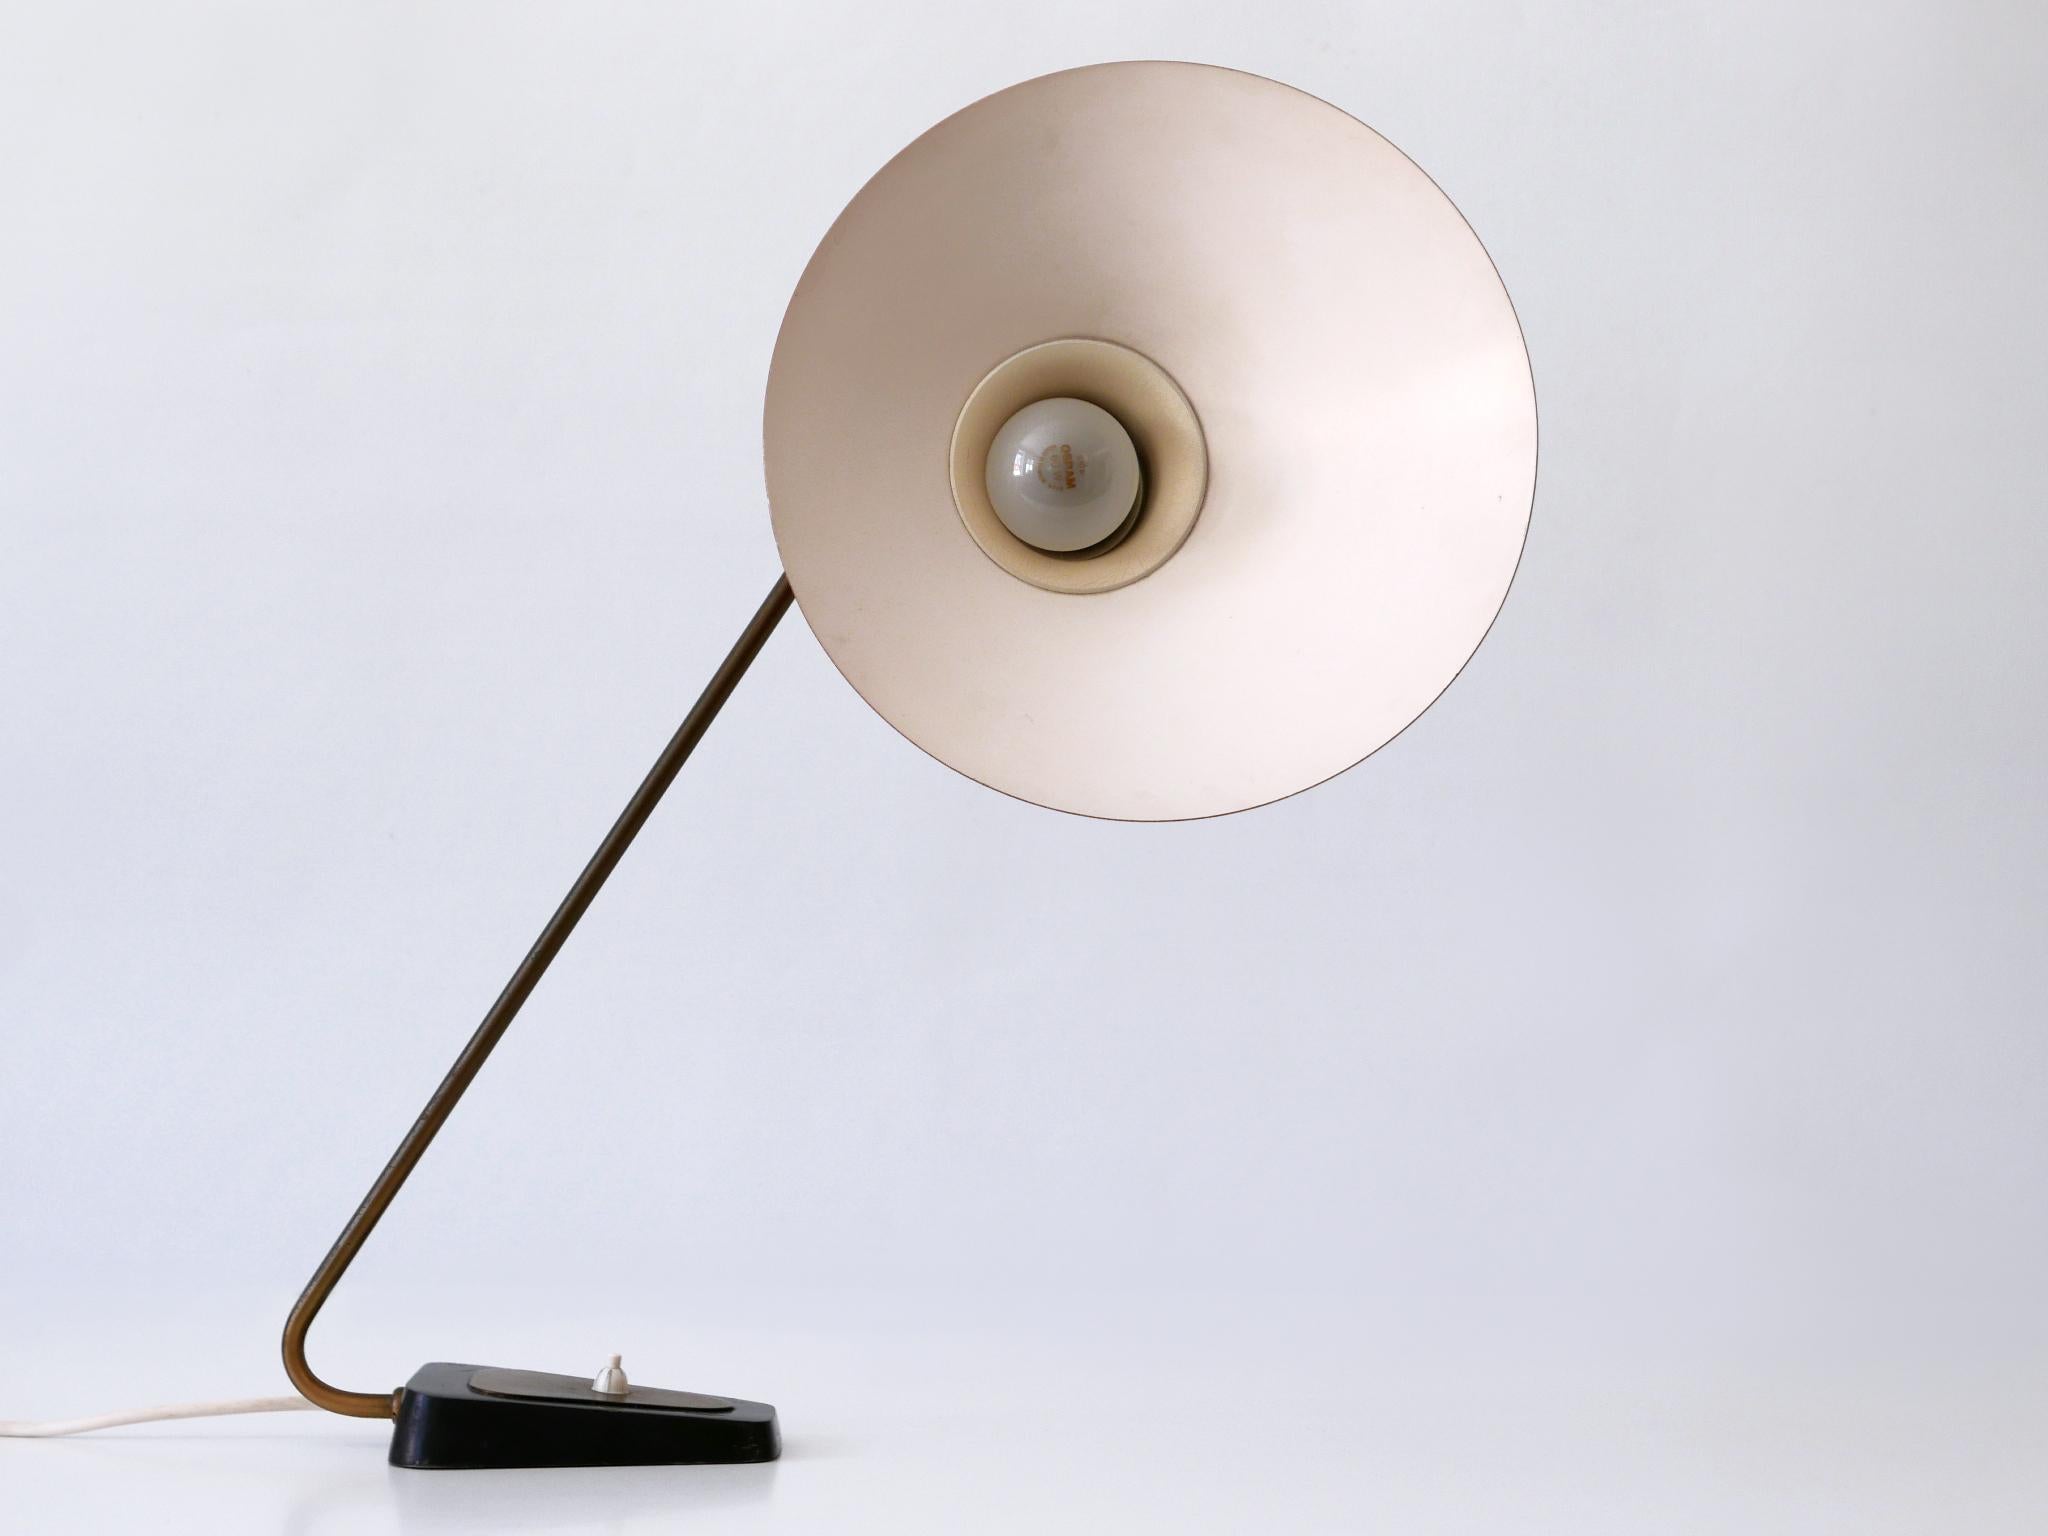 Exceptional Mid-Century Modern Table Lamp by Gebrüder Cosack Germany 1950s For Sale 6